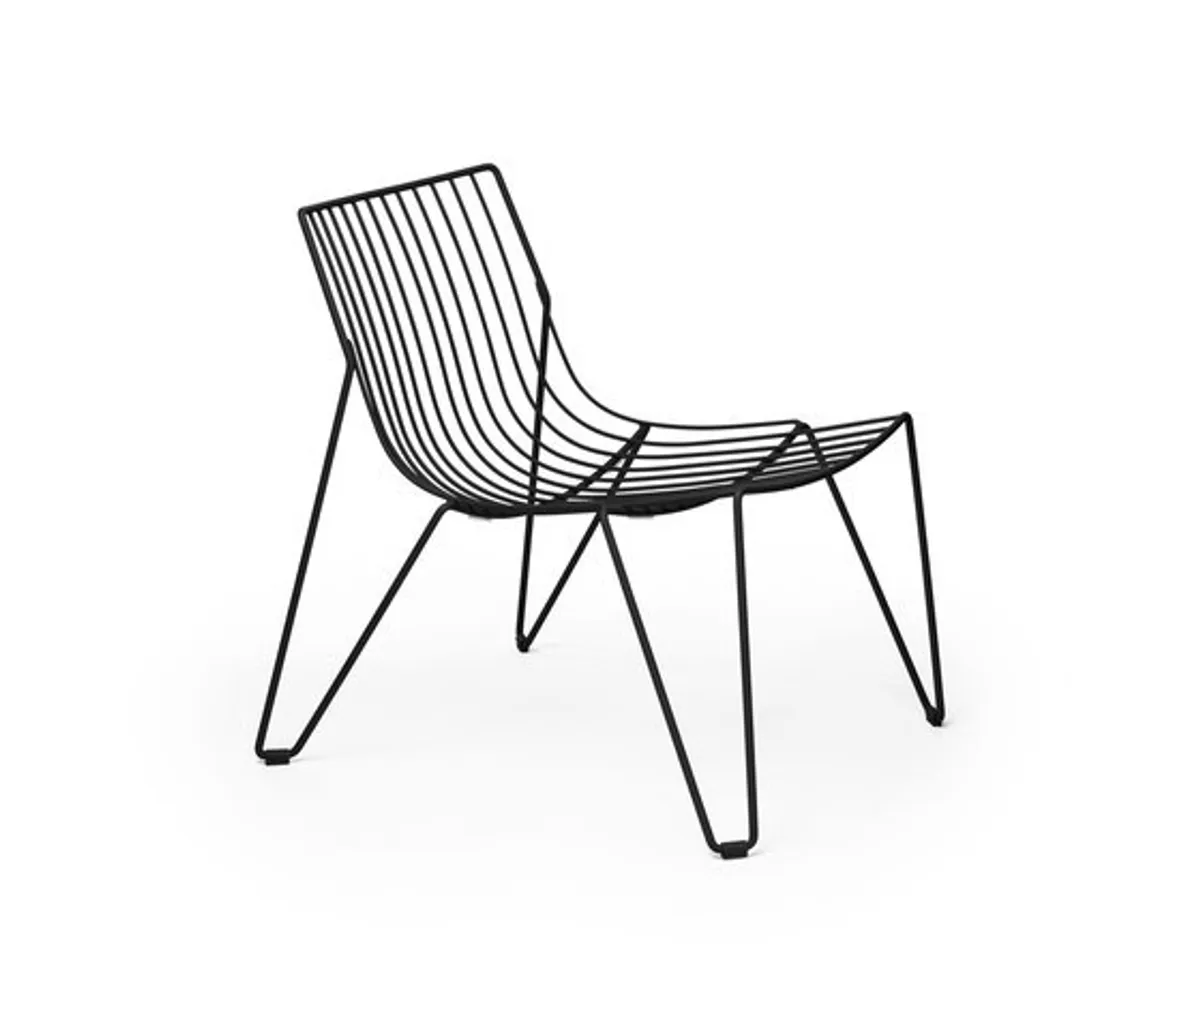 Tio Lounge Chair 01 Inside Out Contracts